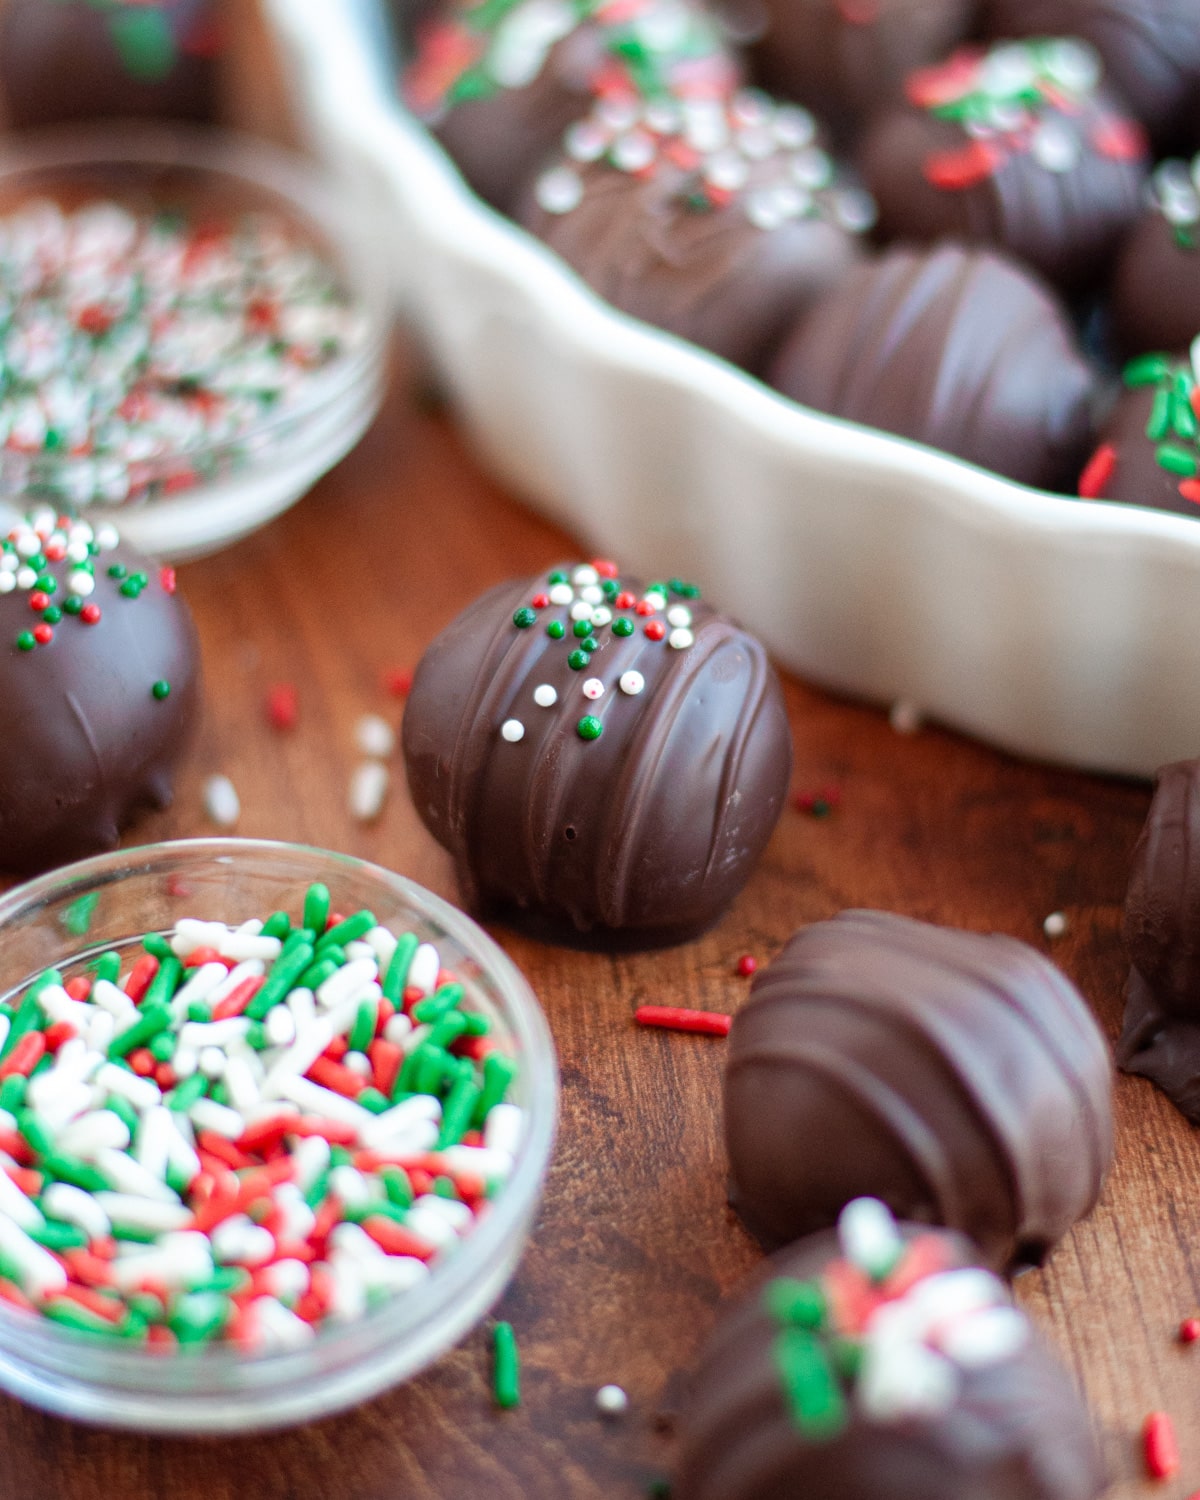 an oreo truffle dipped in dark chocolate and topped with red, white, and green sprinkles. The oreo ball is surrounded by additional truffles, sprinkles, bowls of sprinkles, and a white dish filled with oreo balls.